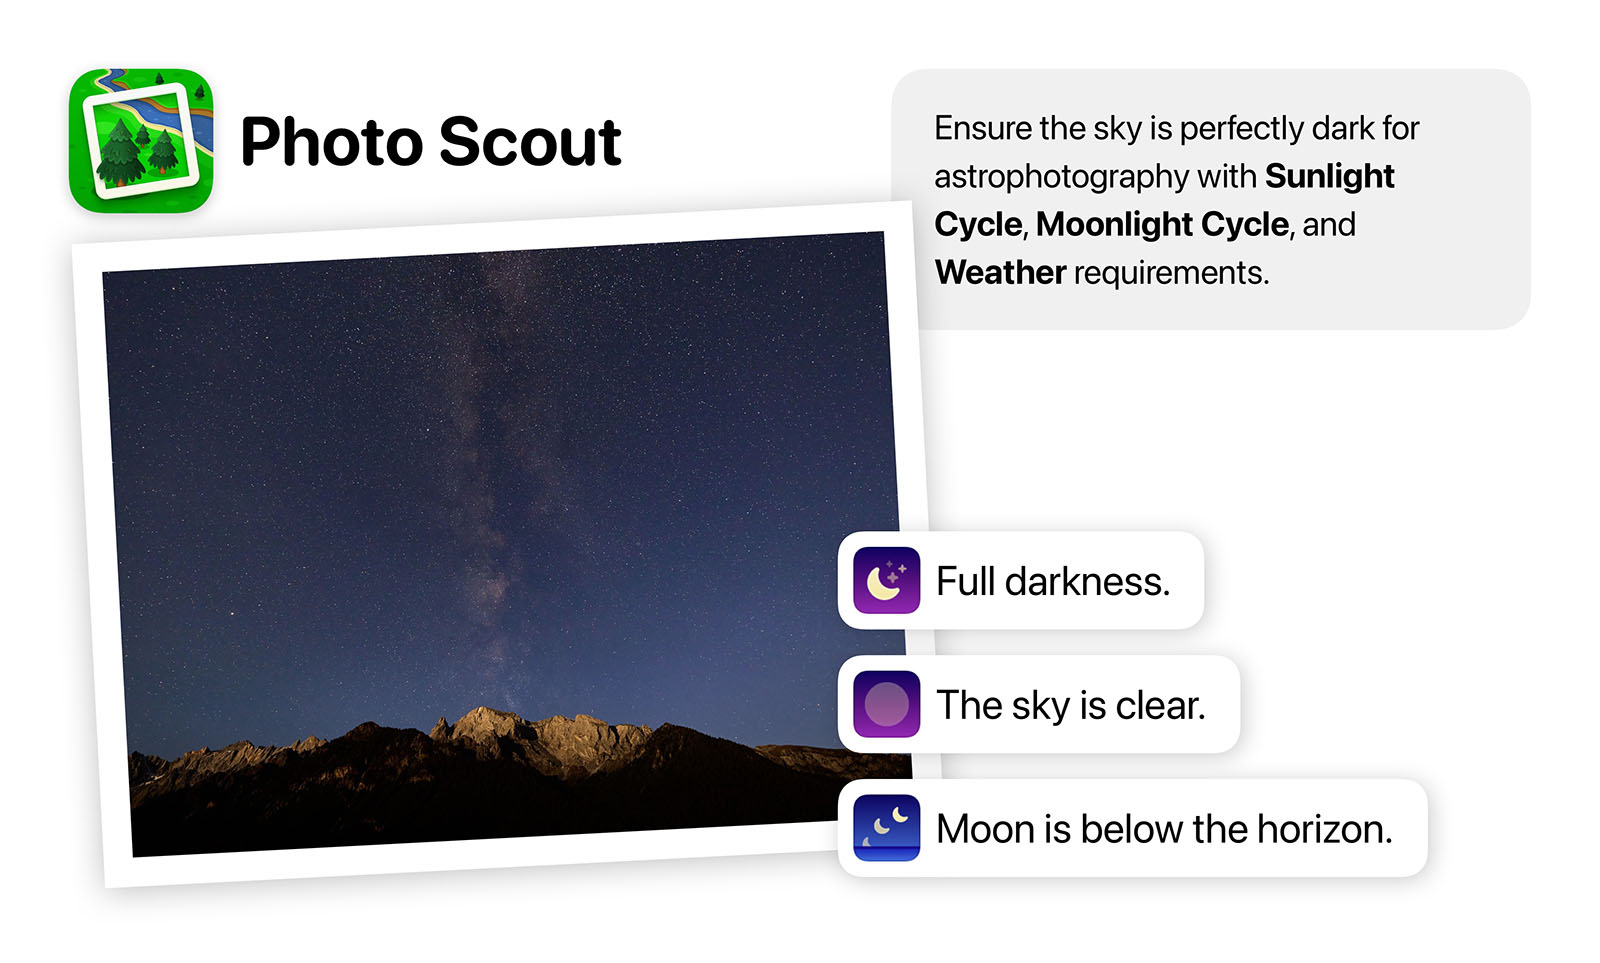 An image shows an example of how Photo Scout can be used to find the right setting for an astrophotography setup.